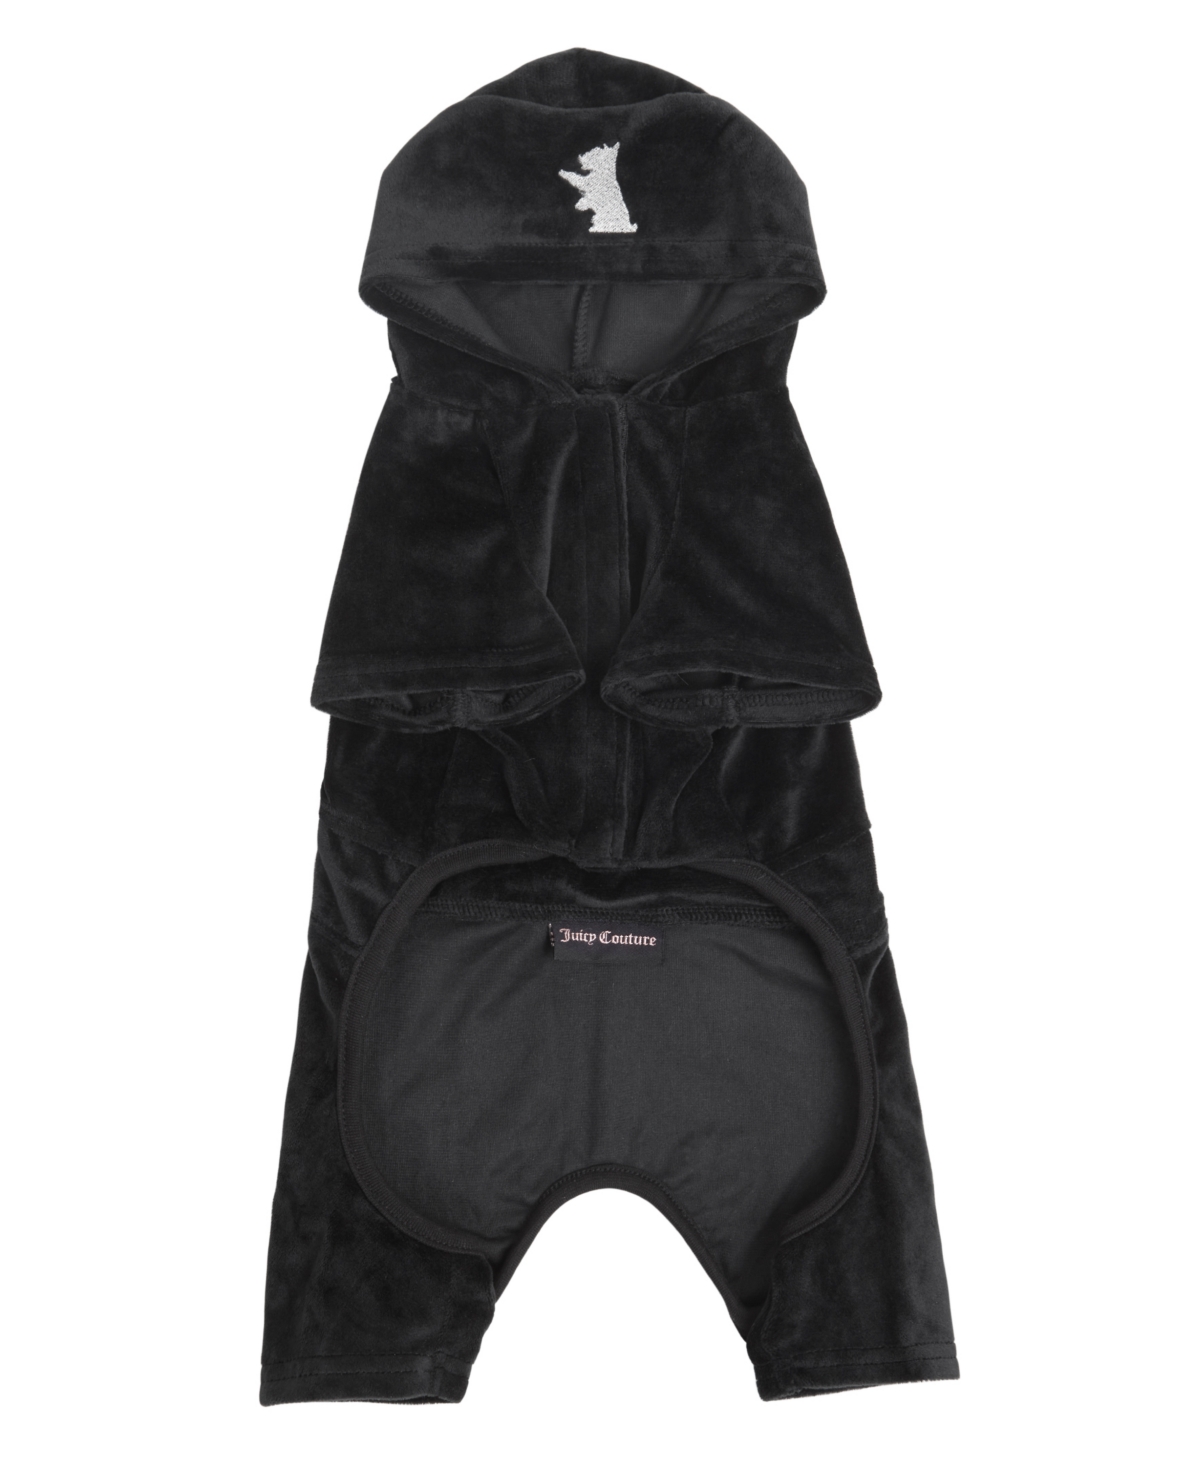 Hooded Pet Juicy Bling Velour Tracksuit for Small Dogs and Cats, XSmall/Small - Black